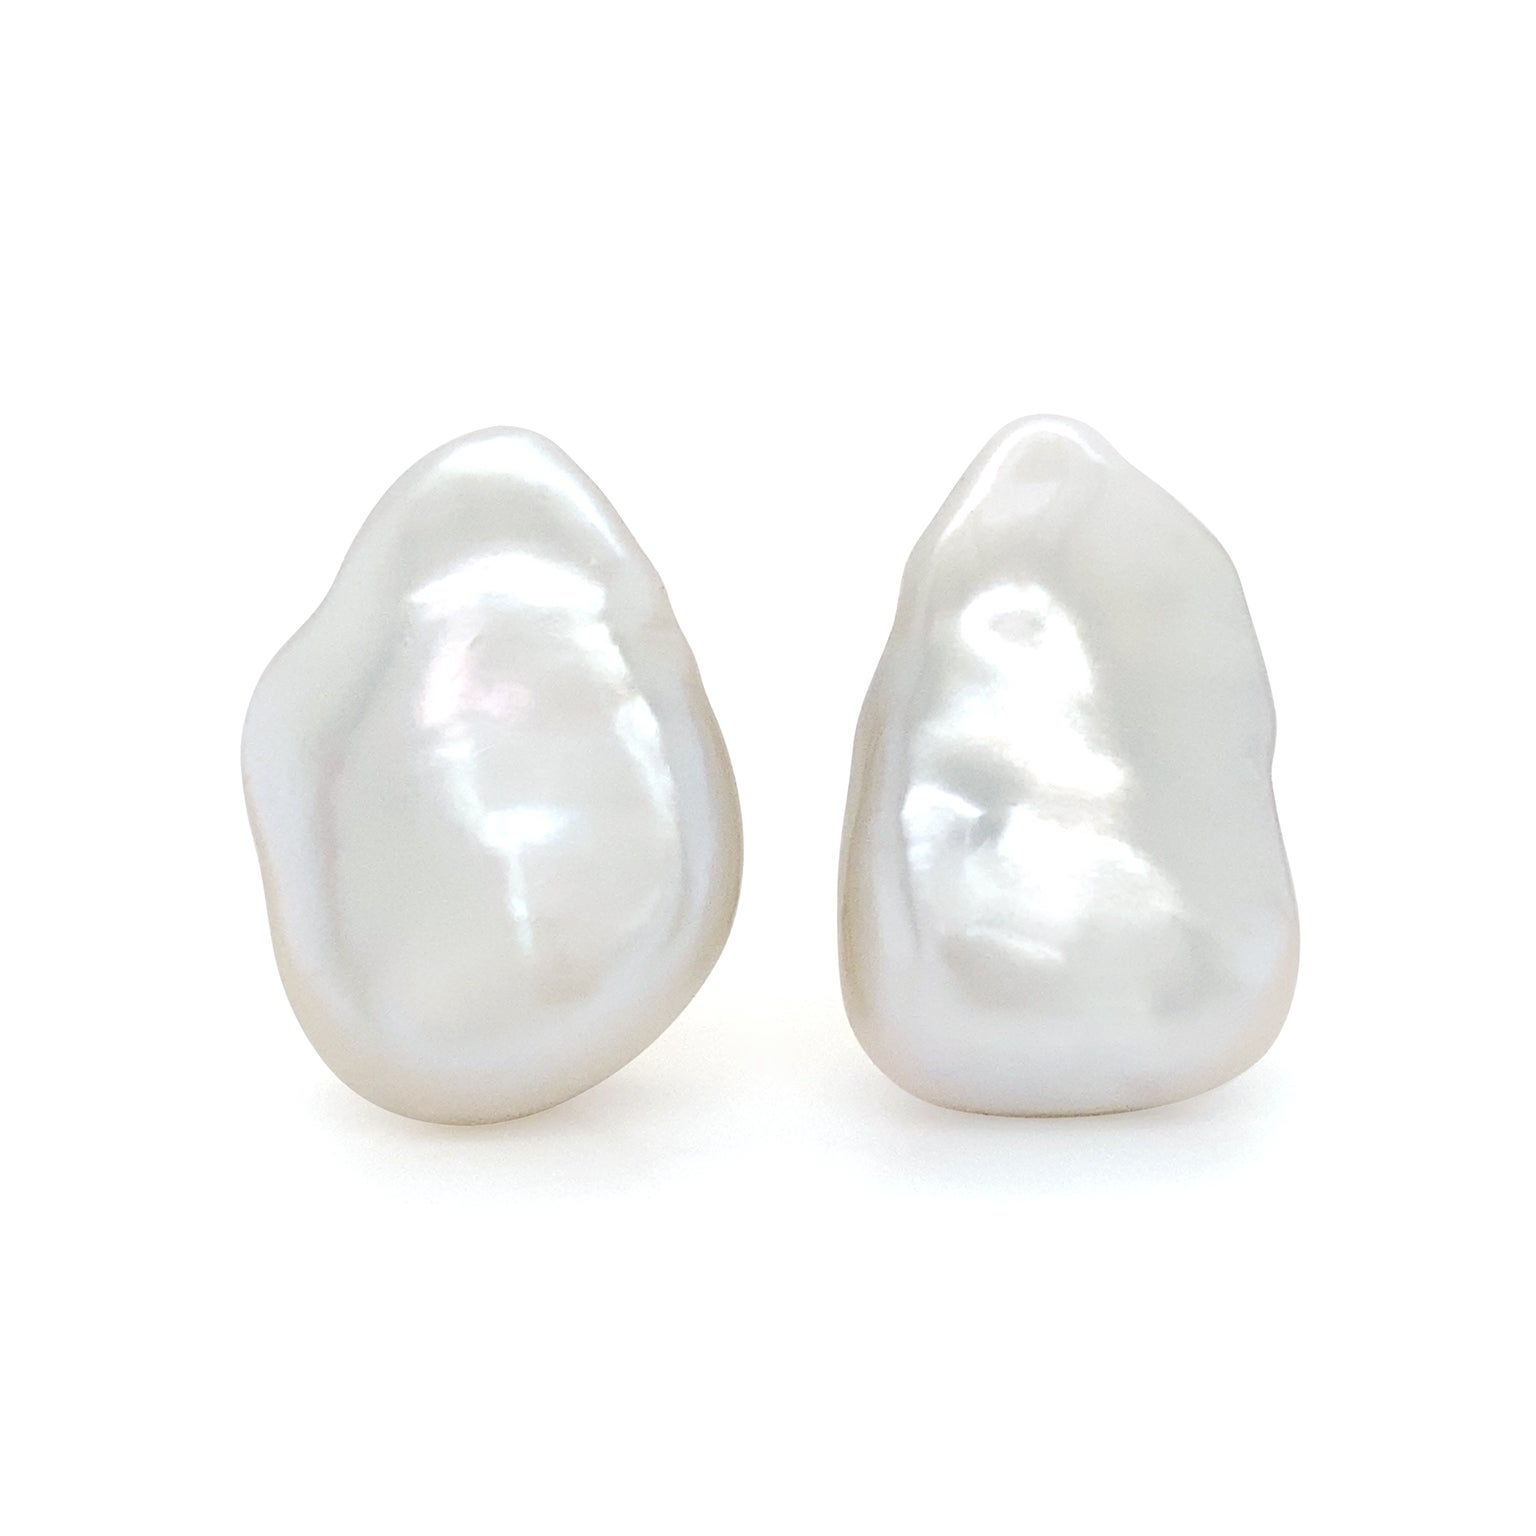 The satin appeal of freshwater pearls are transmitted from these earrings. Light reflects a radiance of silk as delicate shadows are produced in the valleys. Each baroque pearl is set in 18k yellow gold and features subtle differences from its